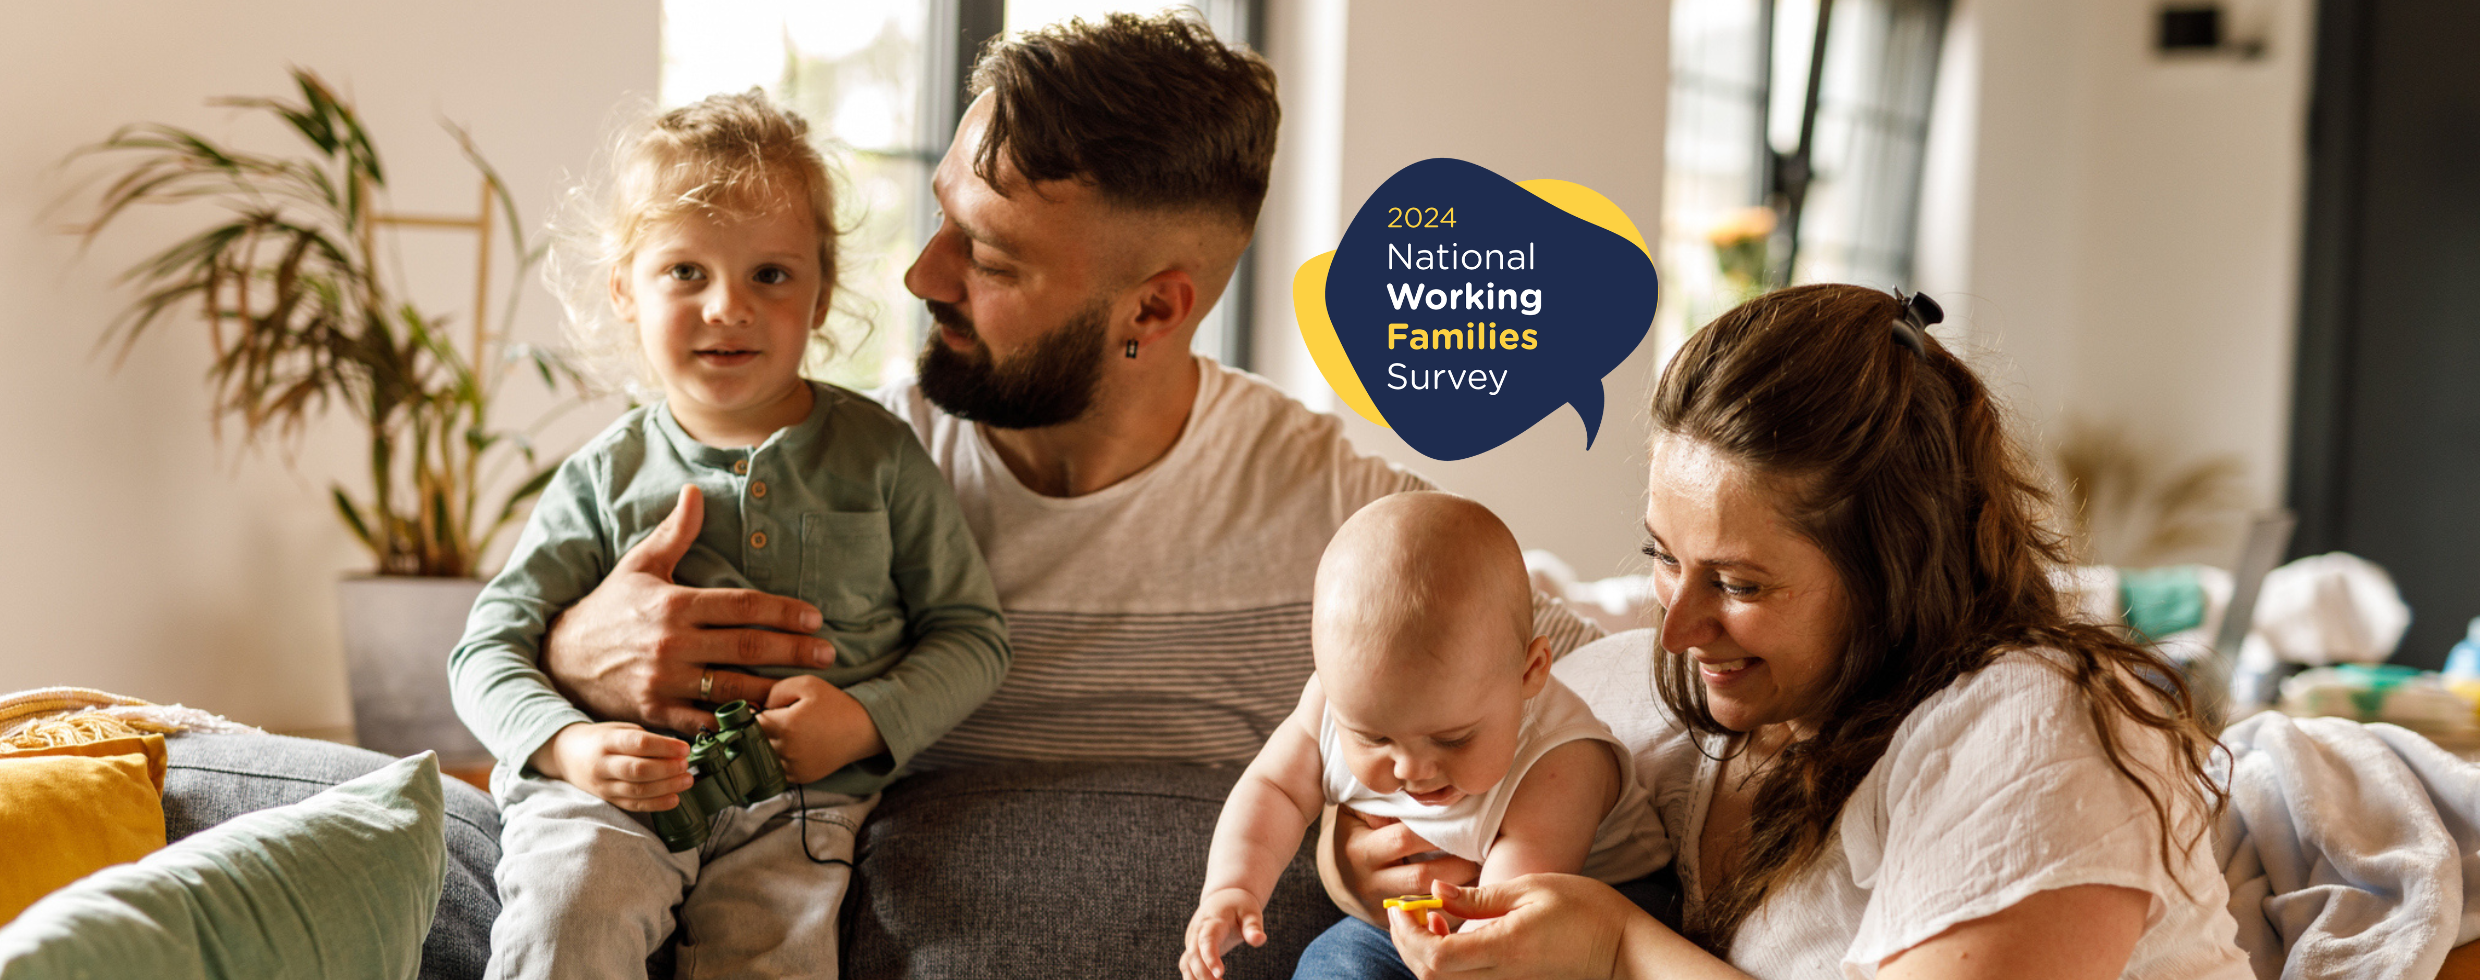 Media Release of National Working Families Survey